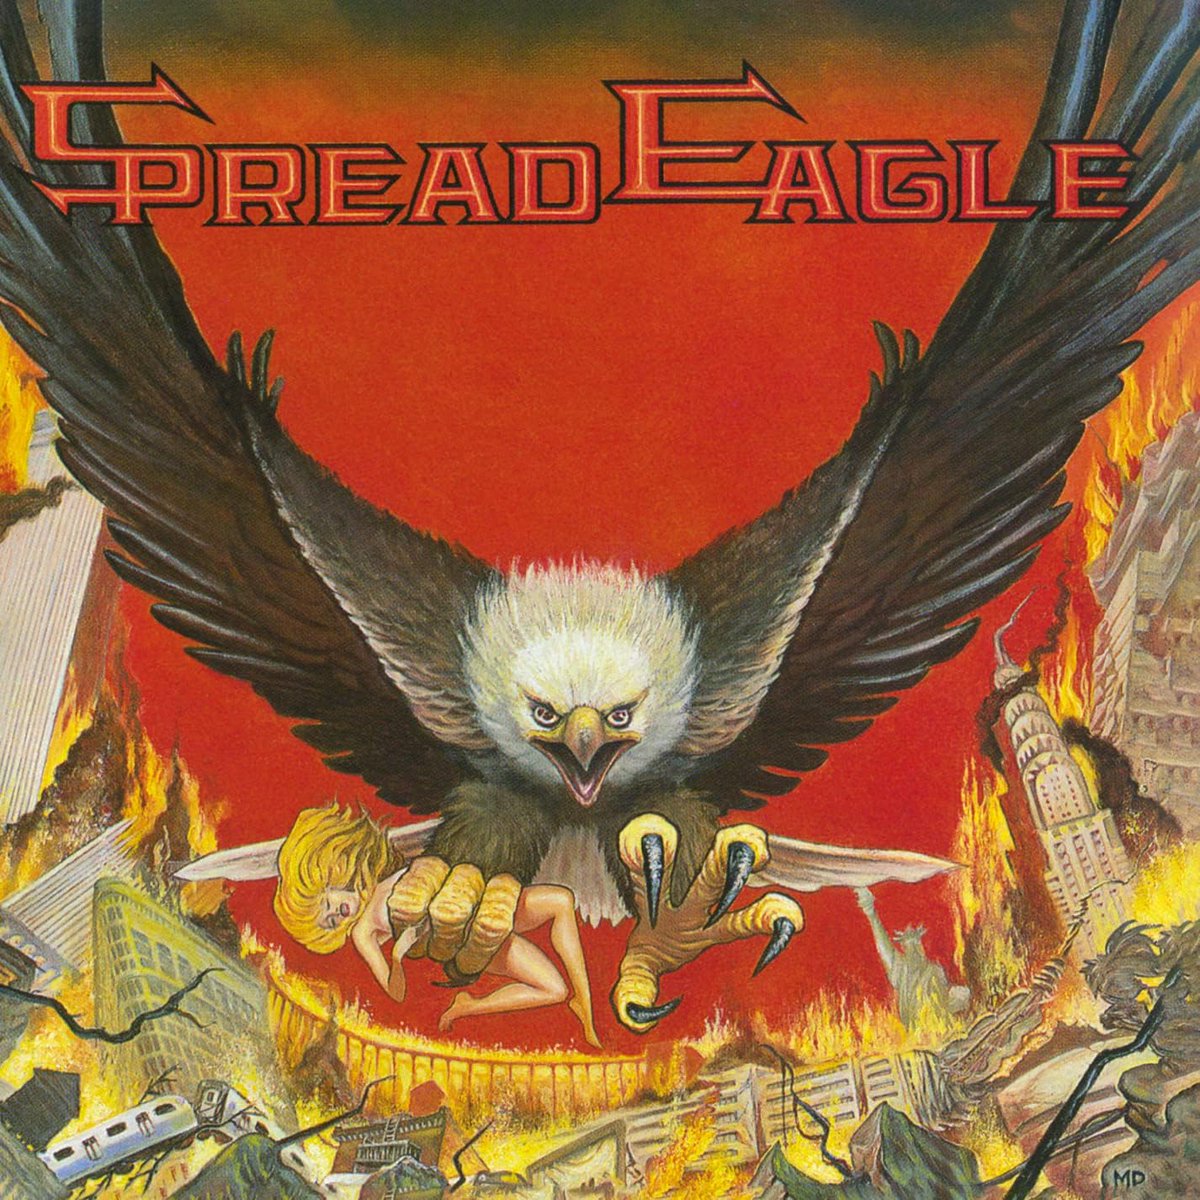 Underrated band!
The 170th #album listened to from 1st to final track of 2024 is the 1990 S/T debut by @spreadeaglenyc.
#Kickass #Sunday #music 🔥🎸
My favs:
Hot Sex👊
Spread Eagle🎸
Shotgun Kiss👊
#HardRock #glammetal #SpreadEagle
@RobDeLucaBass @RayWest6 #RockSolidAlbumADay2024